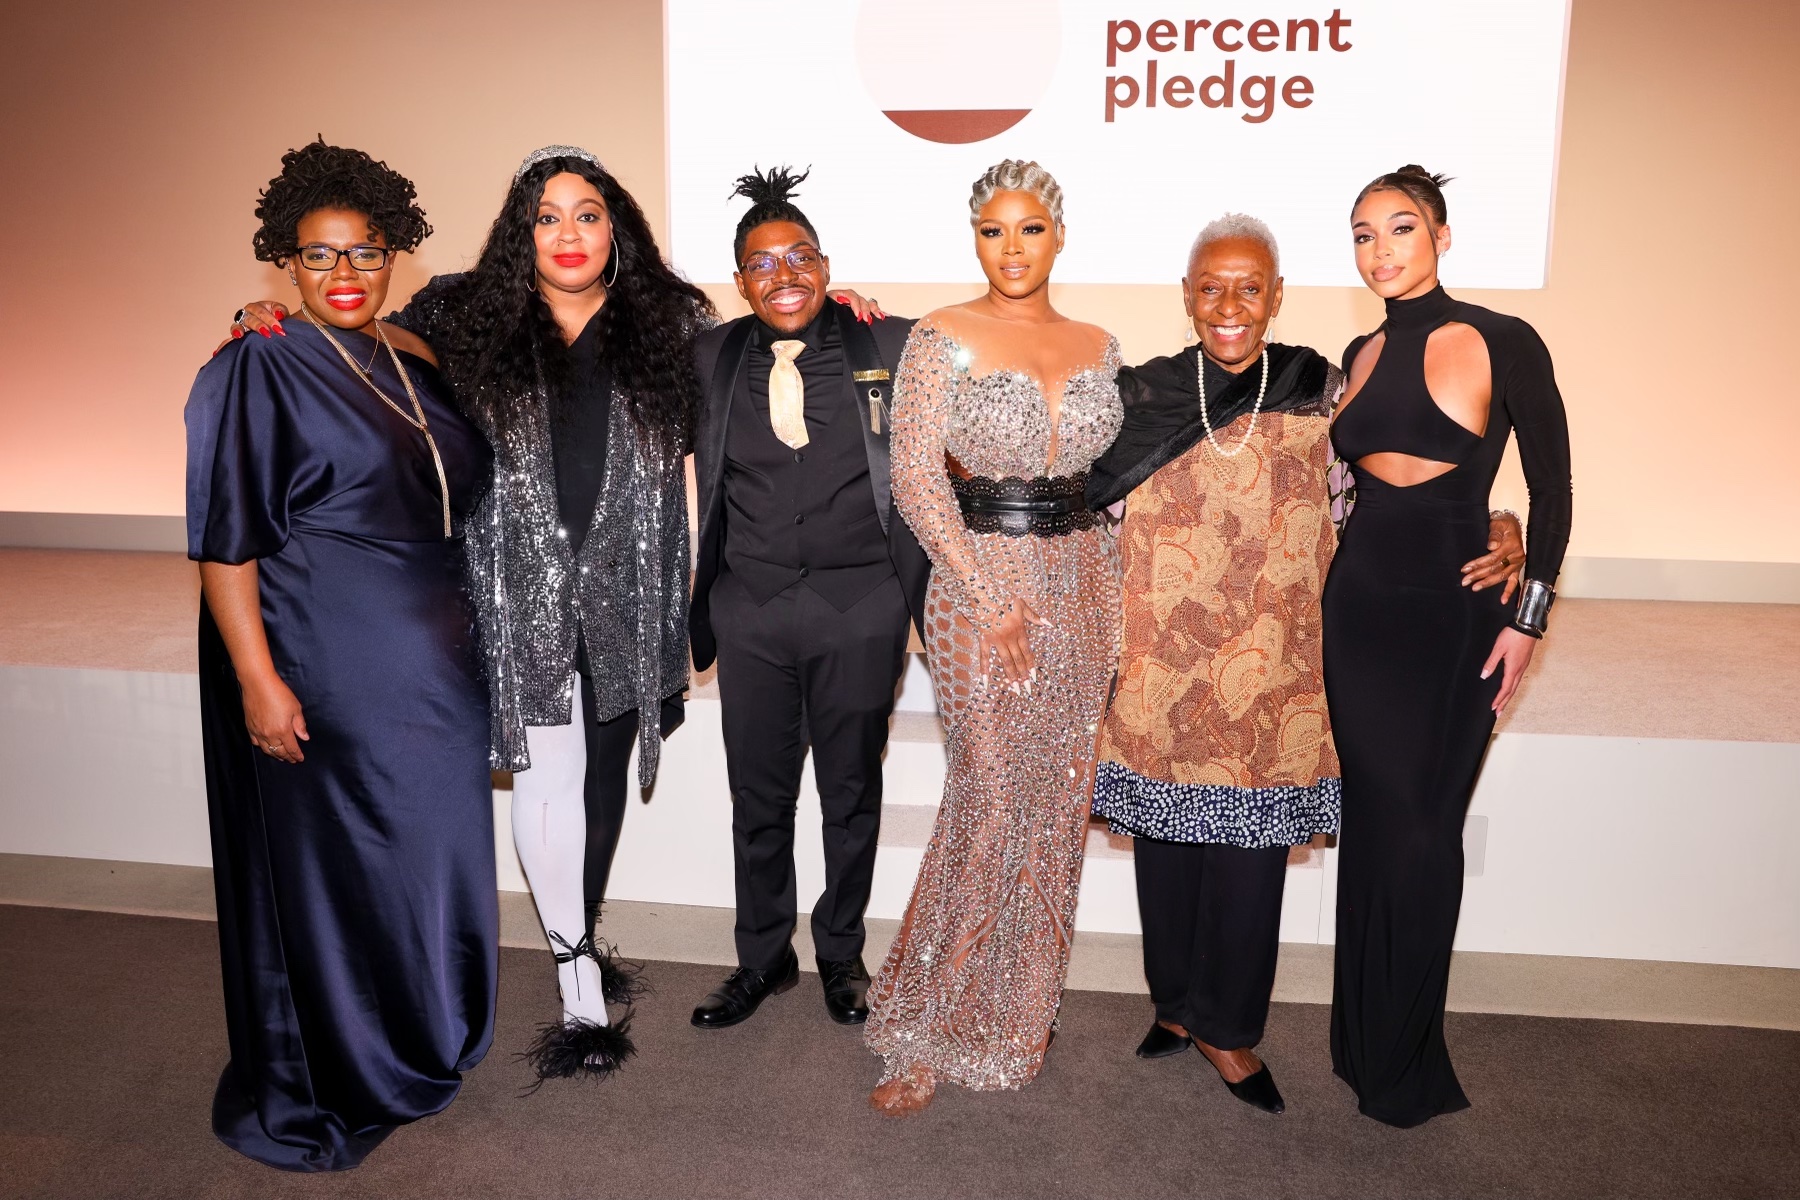 On the Scene: The 2023 15 Percent Pledge Gala Featuring Lori Harvey in Laquan Smith, Emma Grede in Aliette, Claire Sulmers in Matopeda, Aurora James in Christopher John Rogers, and More!